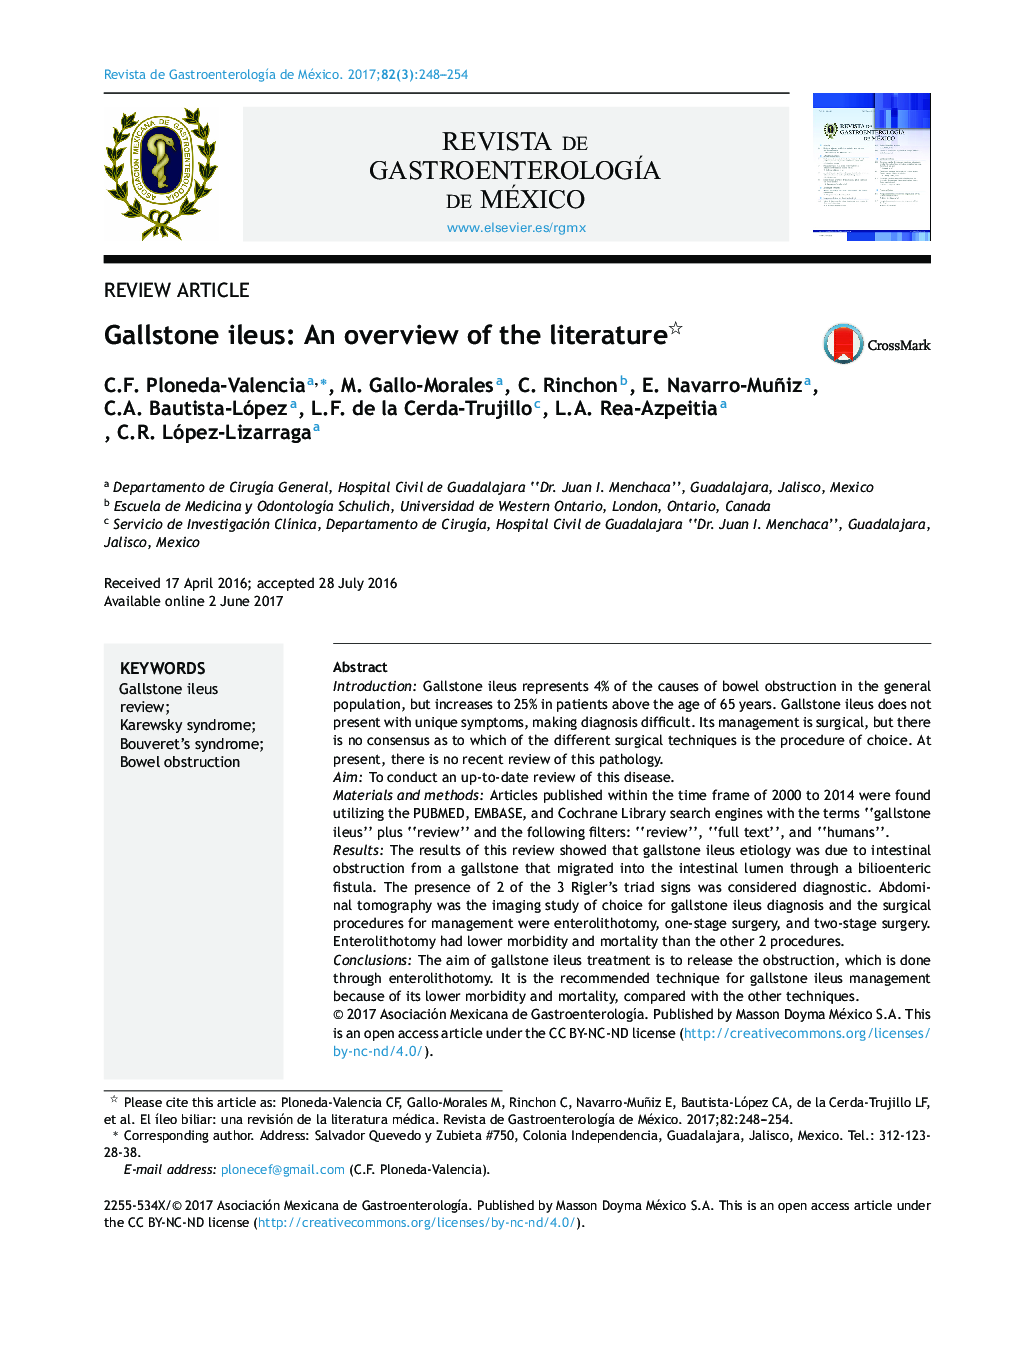 Gallstone ileus: An overview of the literature